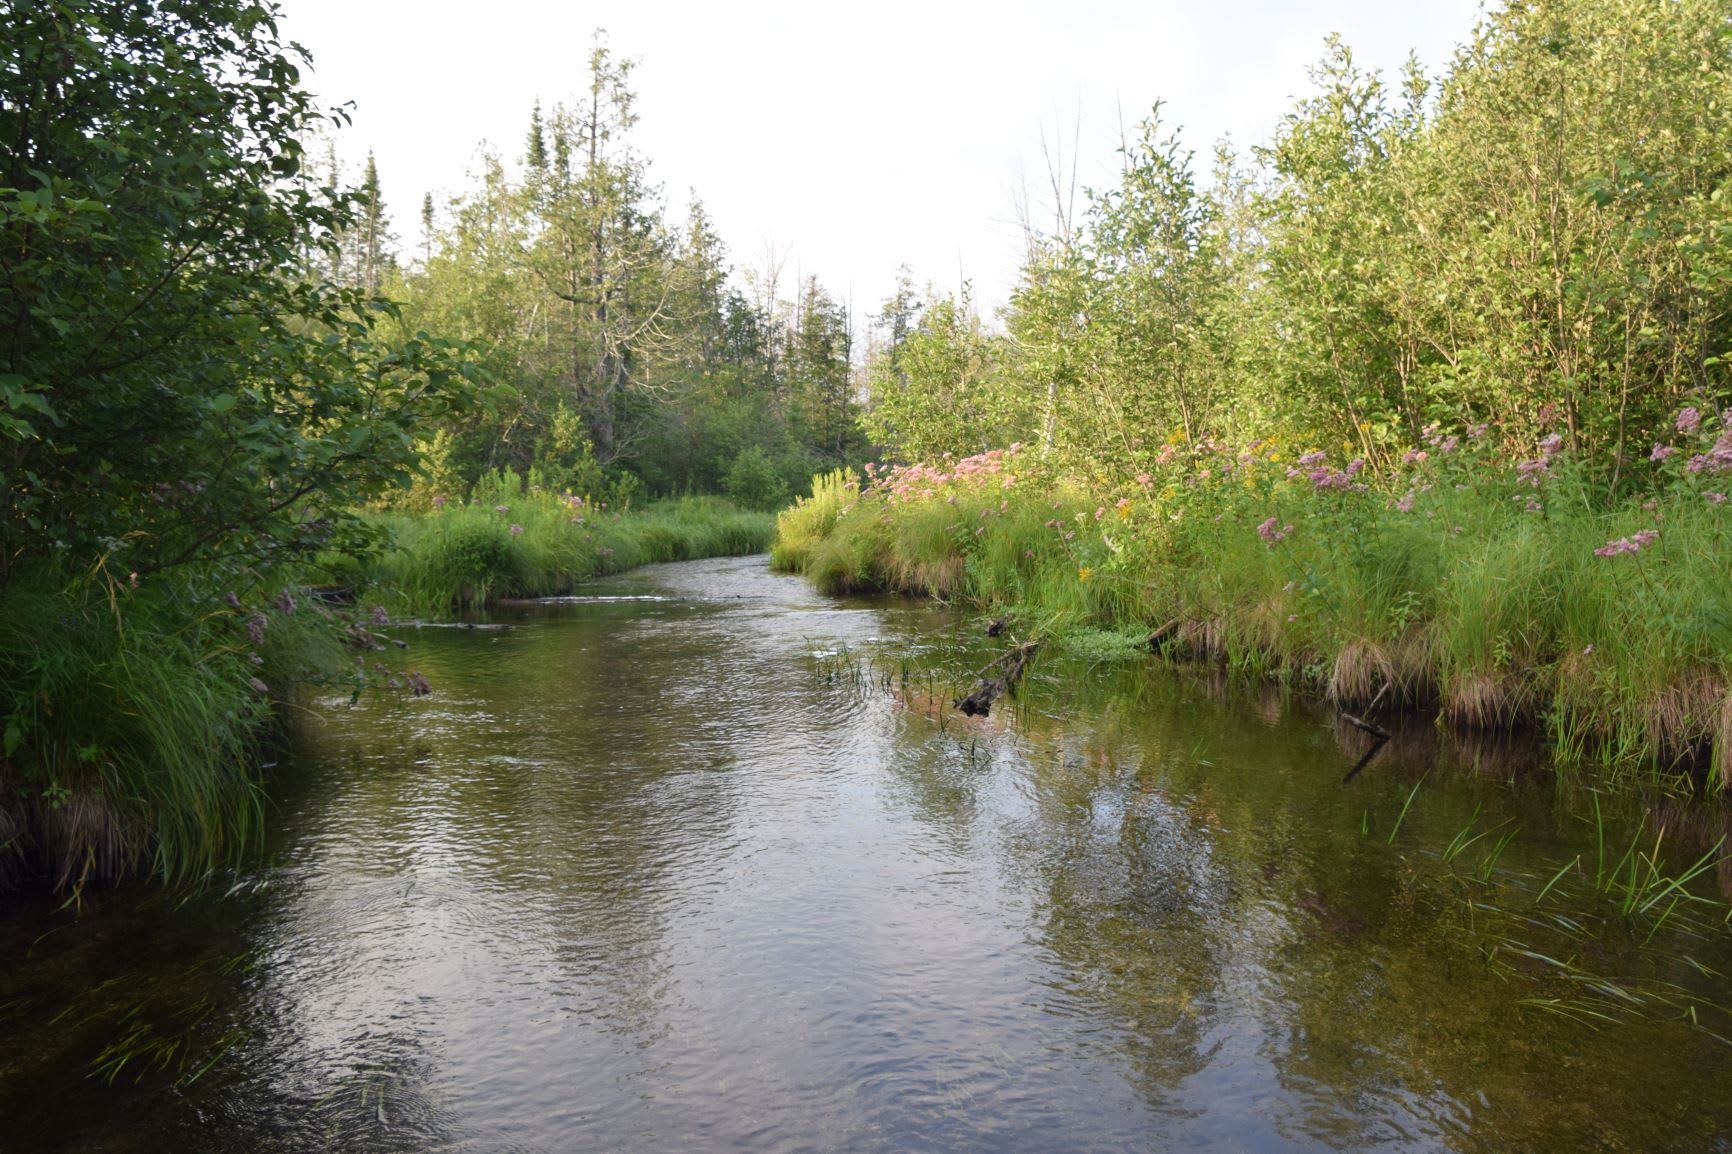 A short walk brings you to the West Branch of the Sturgeon River where you can sit and listen to the sound of water flowing and birds singing.